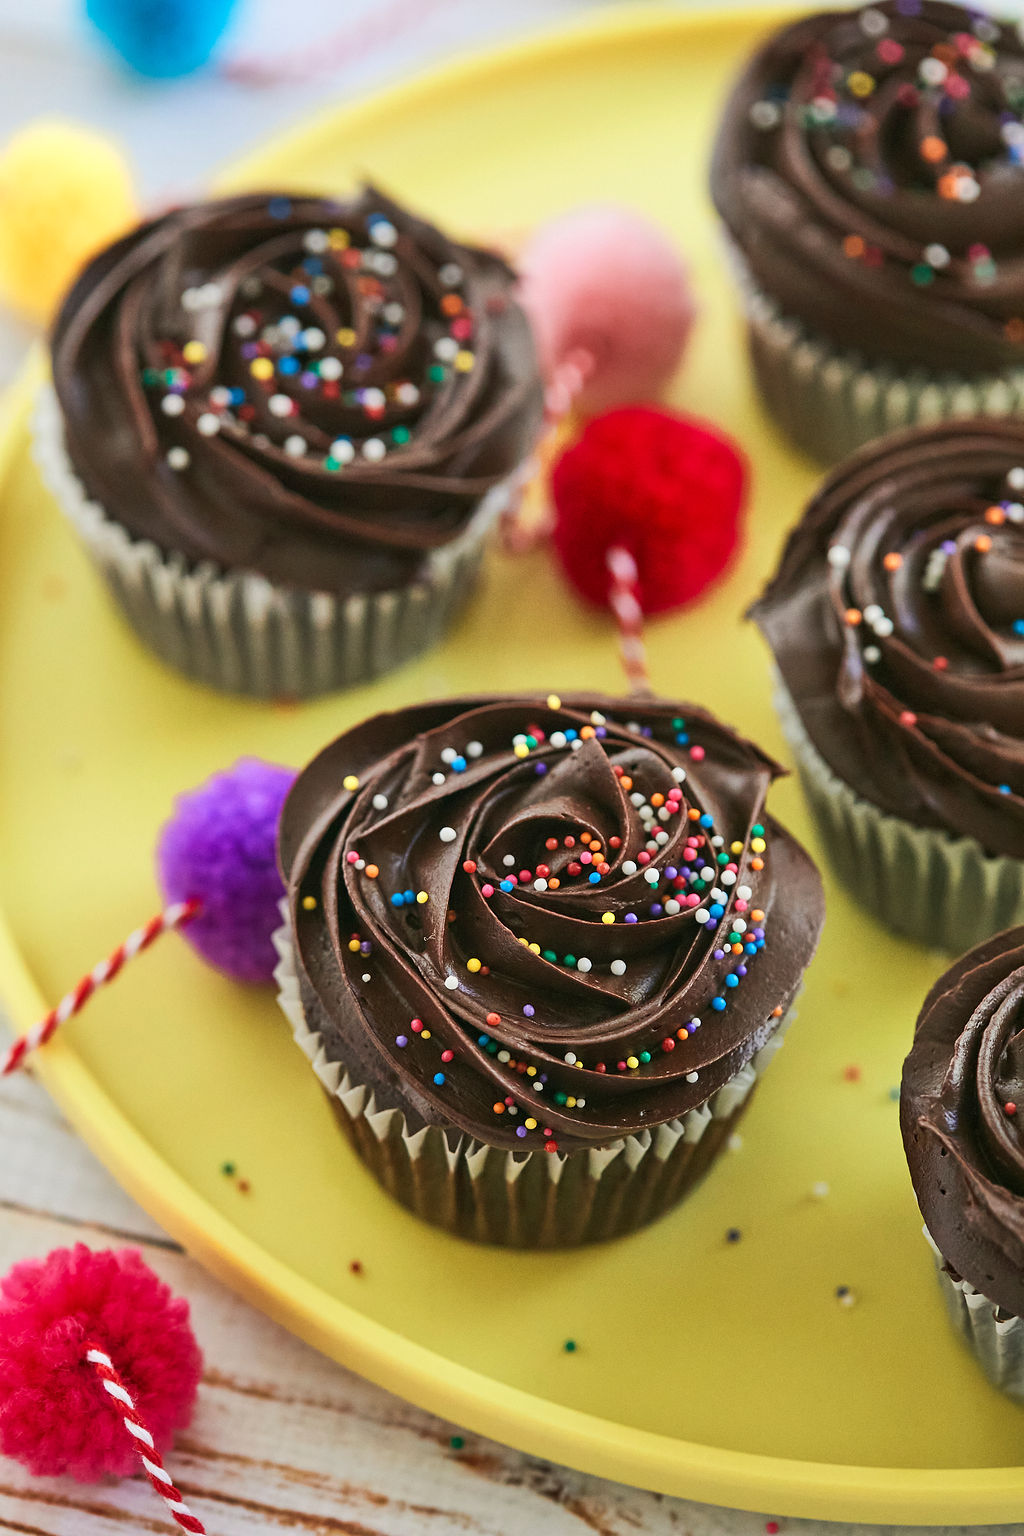 Chocolate Cupcakes with fudge frosting topped with sprinkles.